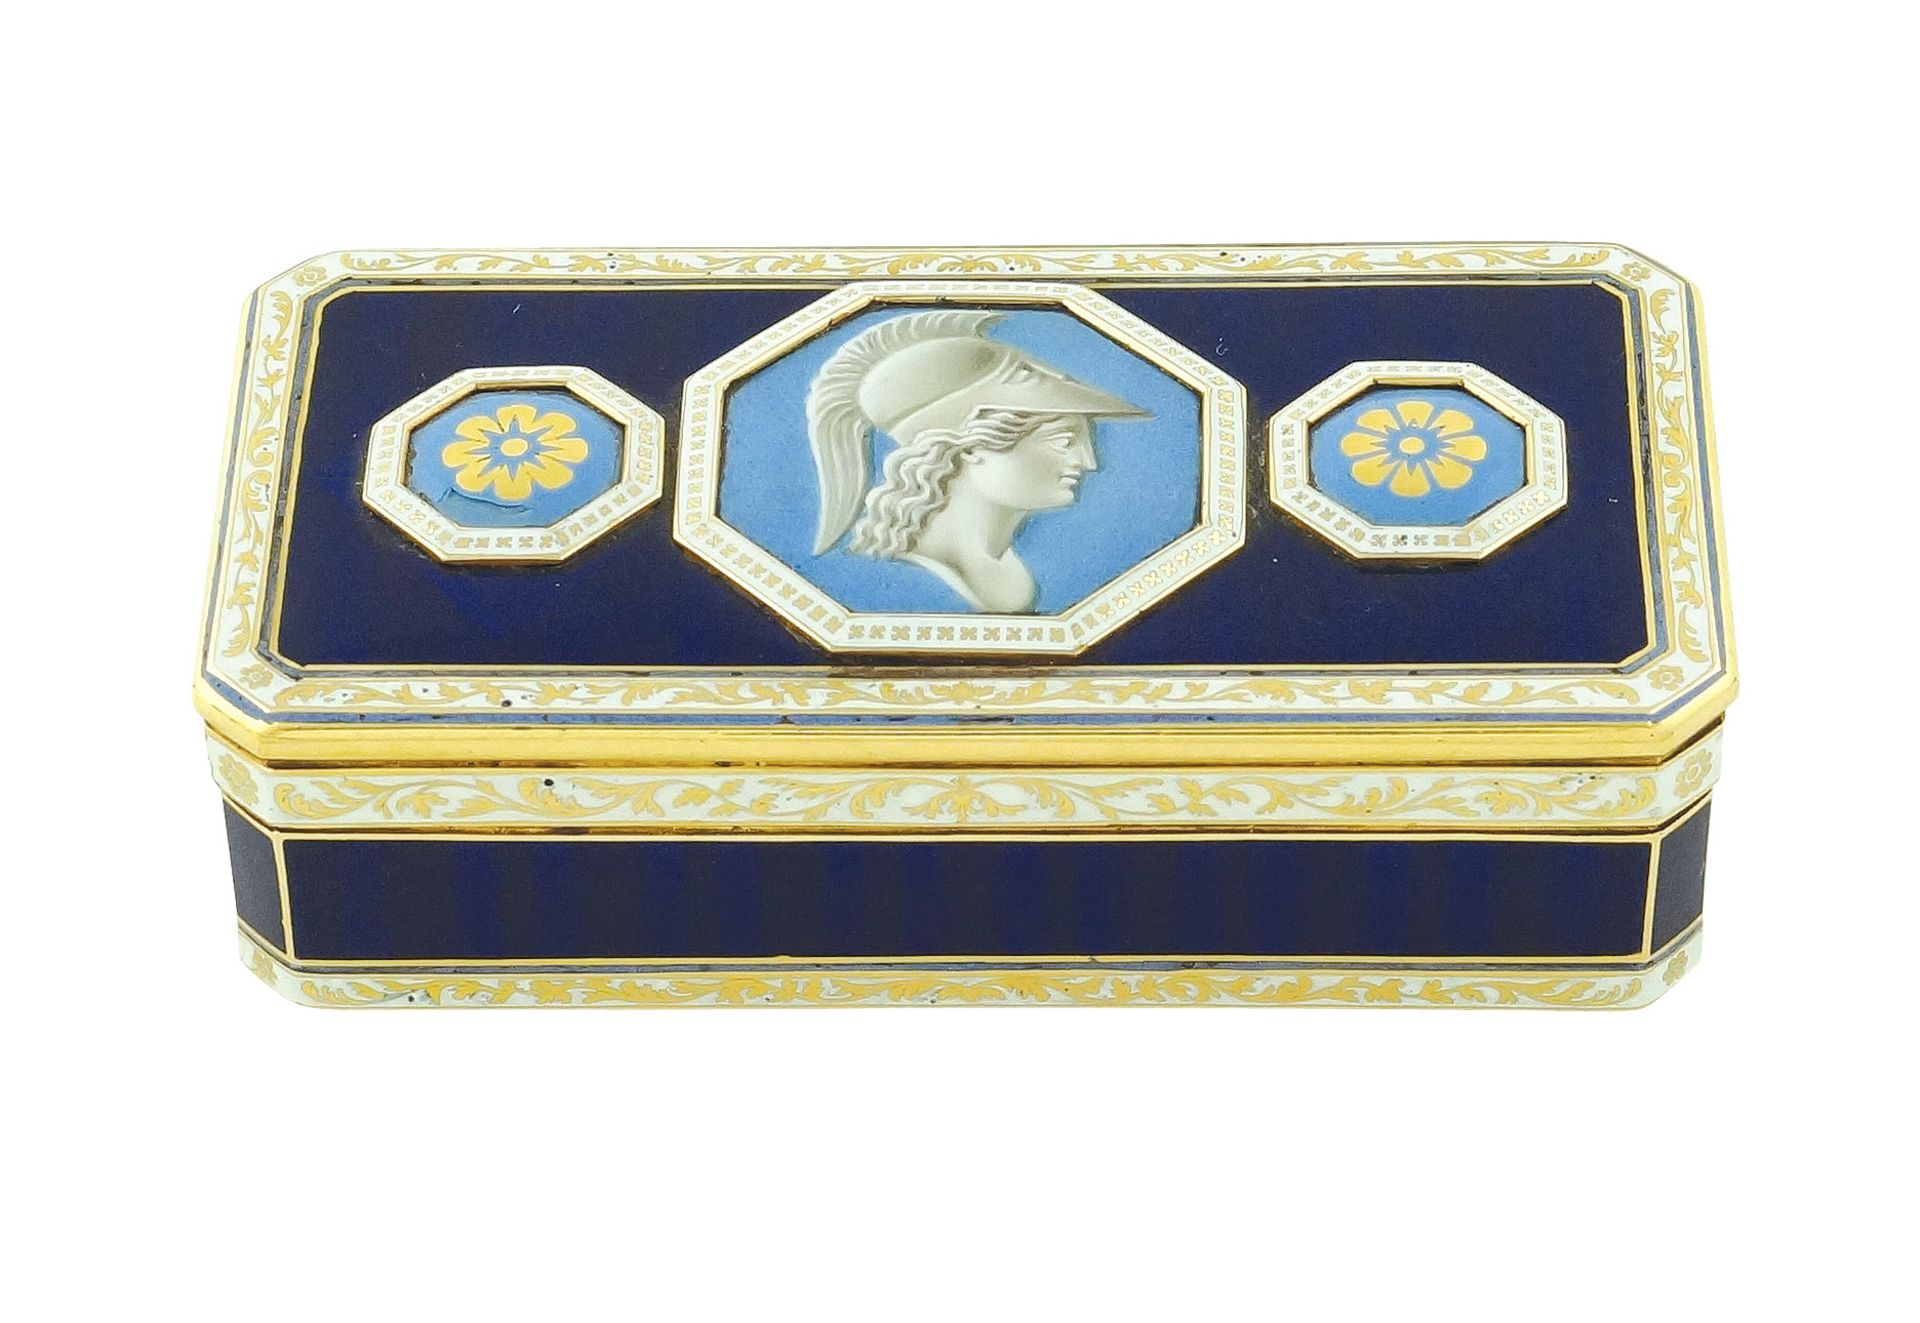 A French gold and enamel snuff box